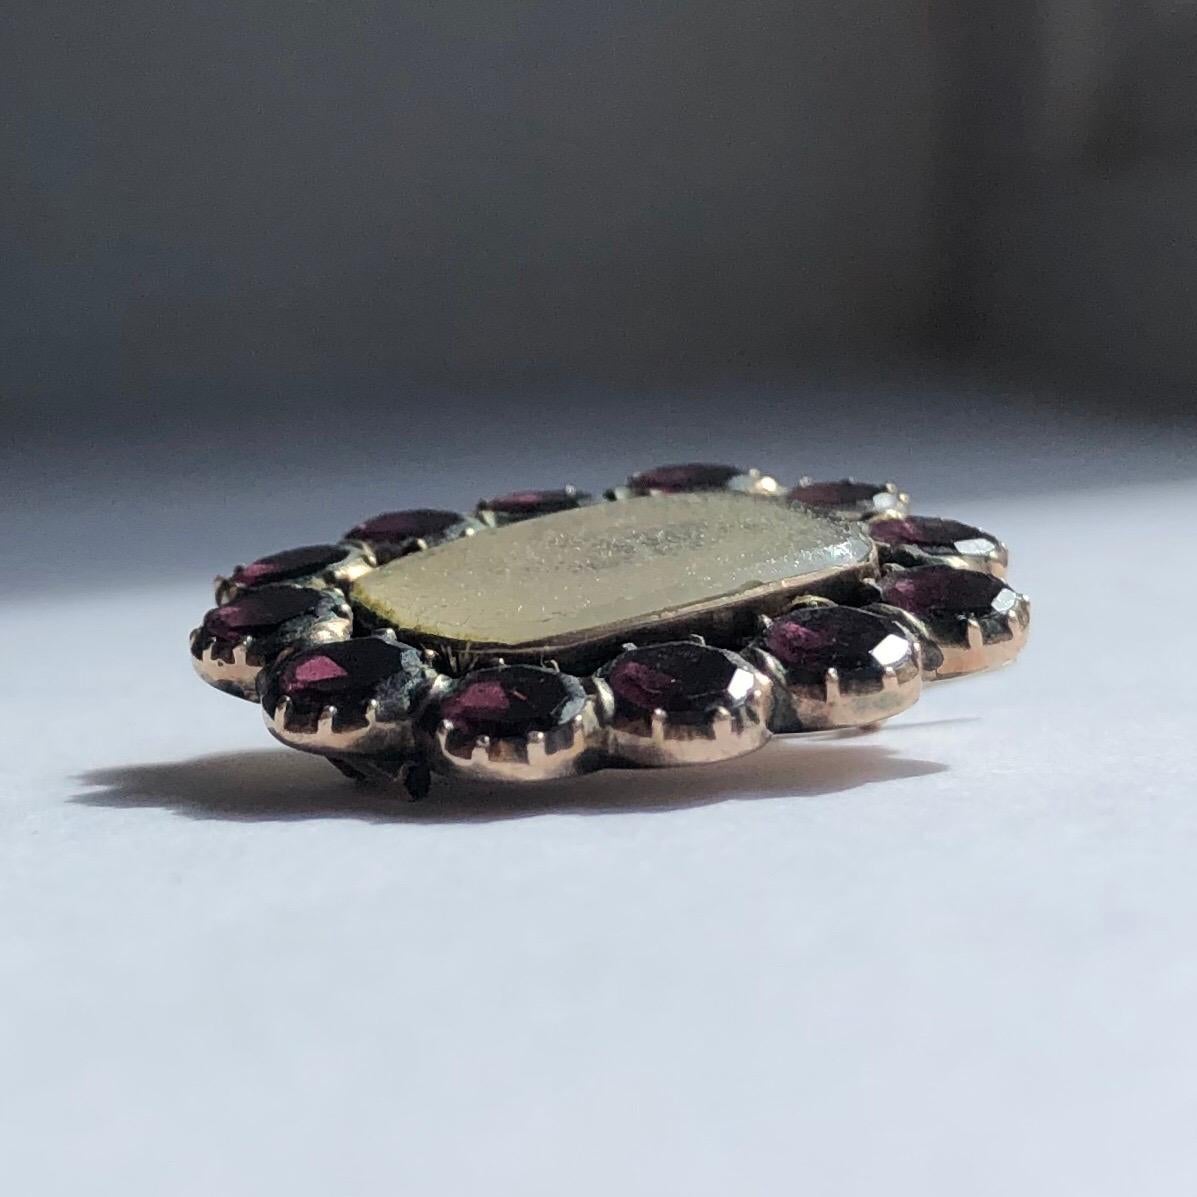 This stunning brooch would also make a stunning pendant! The hair behind the locket front is surrounded by beautiful flat cut garnets, typical of the Georgian period. 

Brooch Dimensions: 22x19mm

Weight: 2.58g